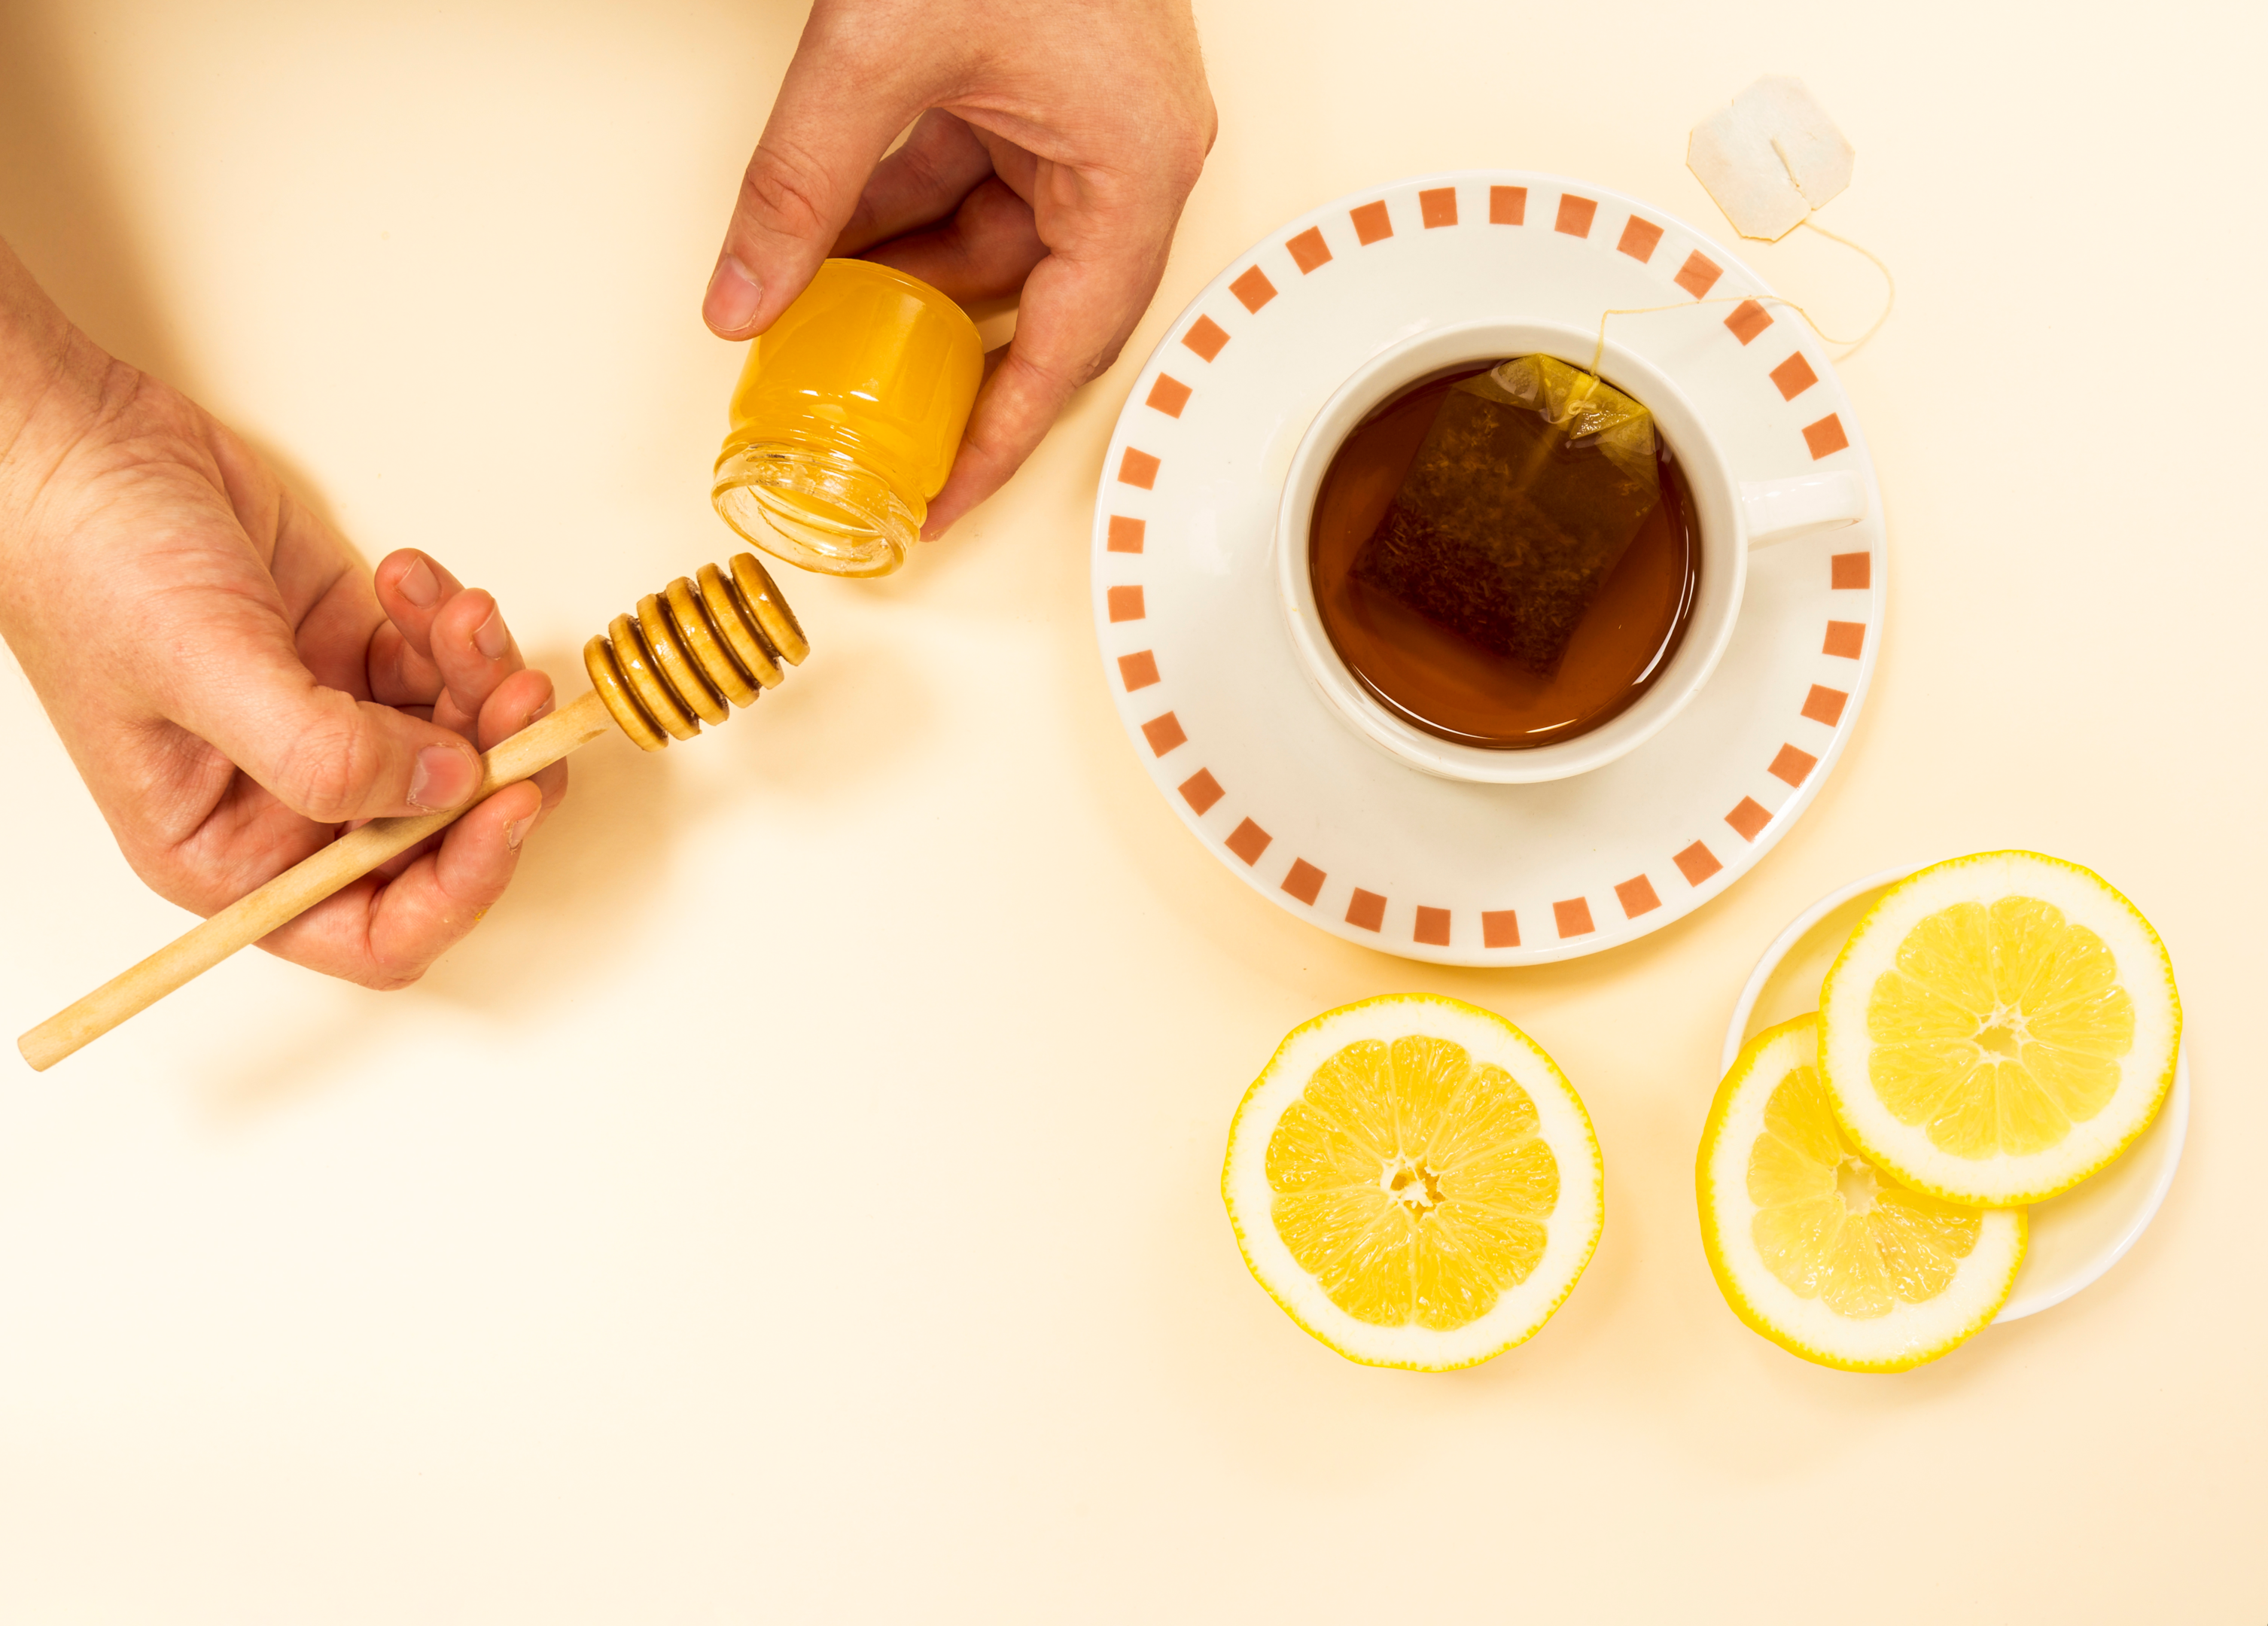 Lemon, honey and a hot steamy drink form a practical recipe for chronic and acute cough.